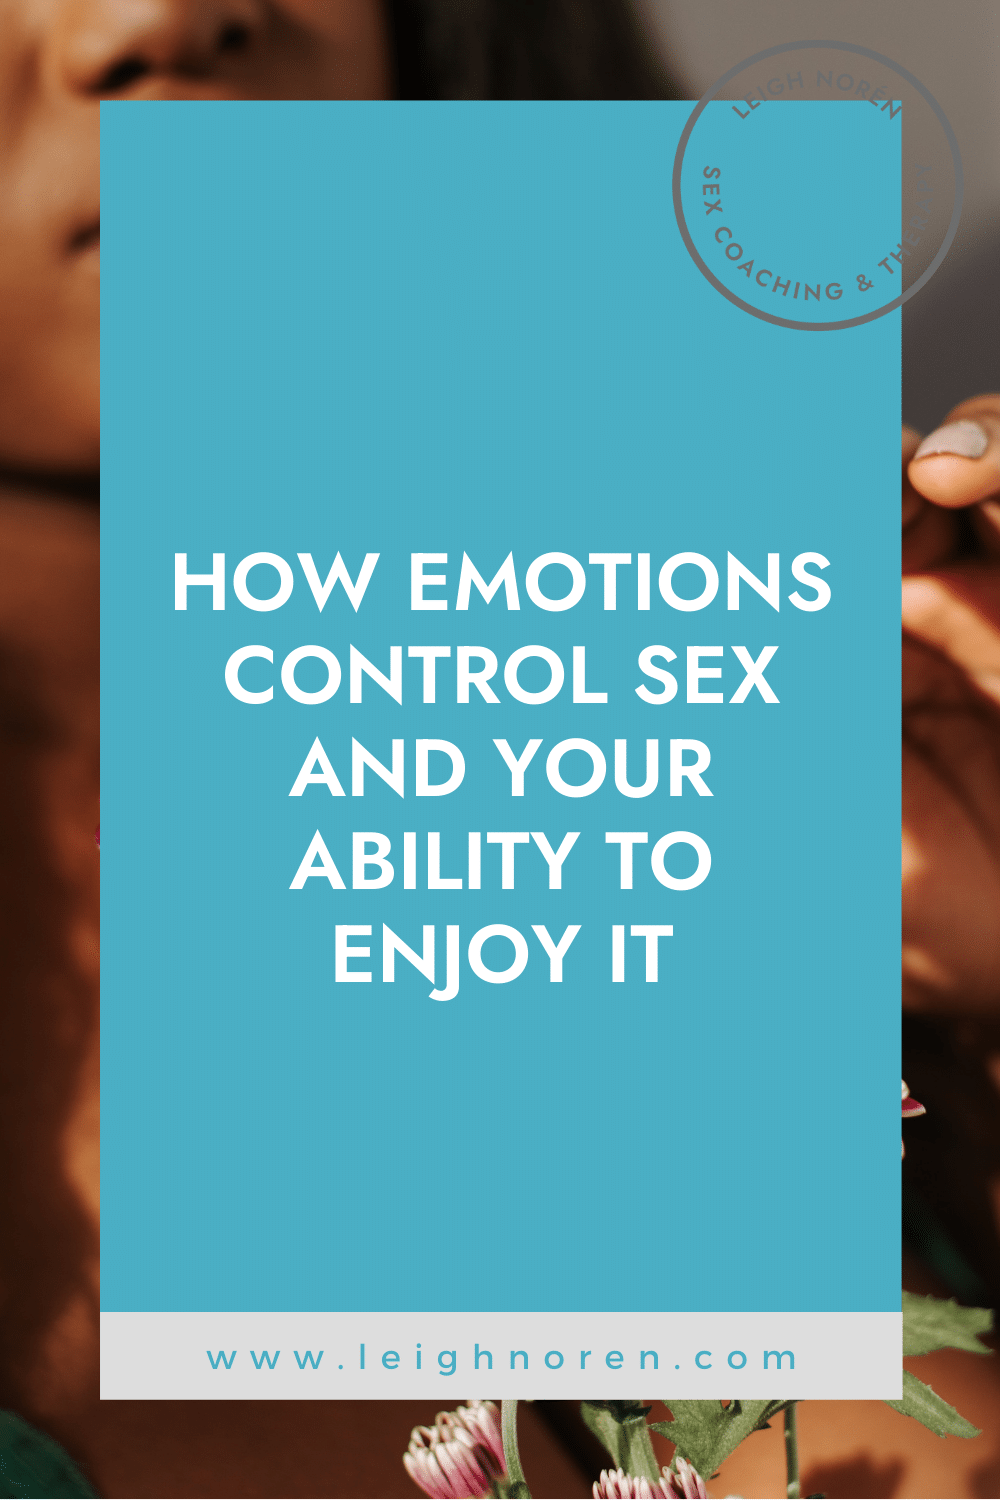 How Emotions Control Sex And Your Ability To Enjoy It